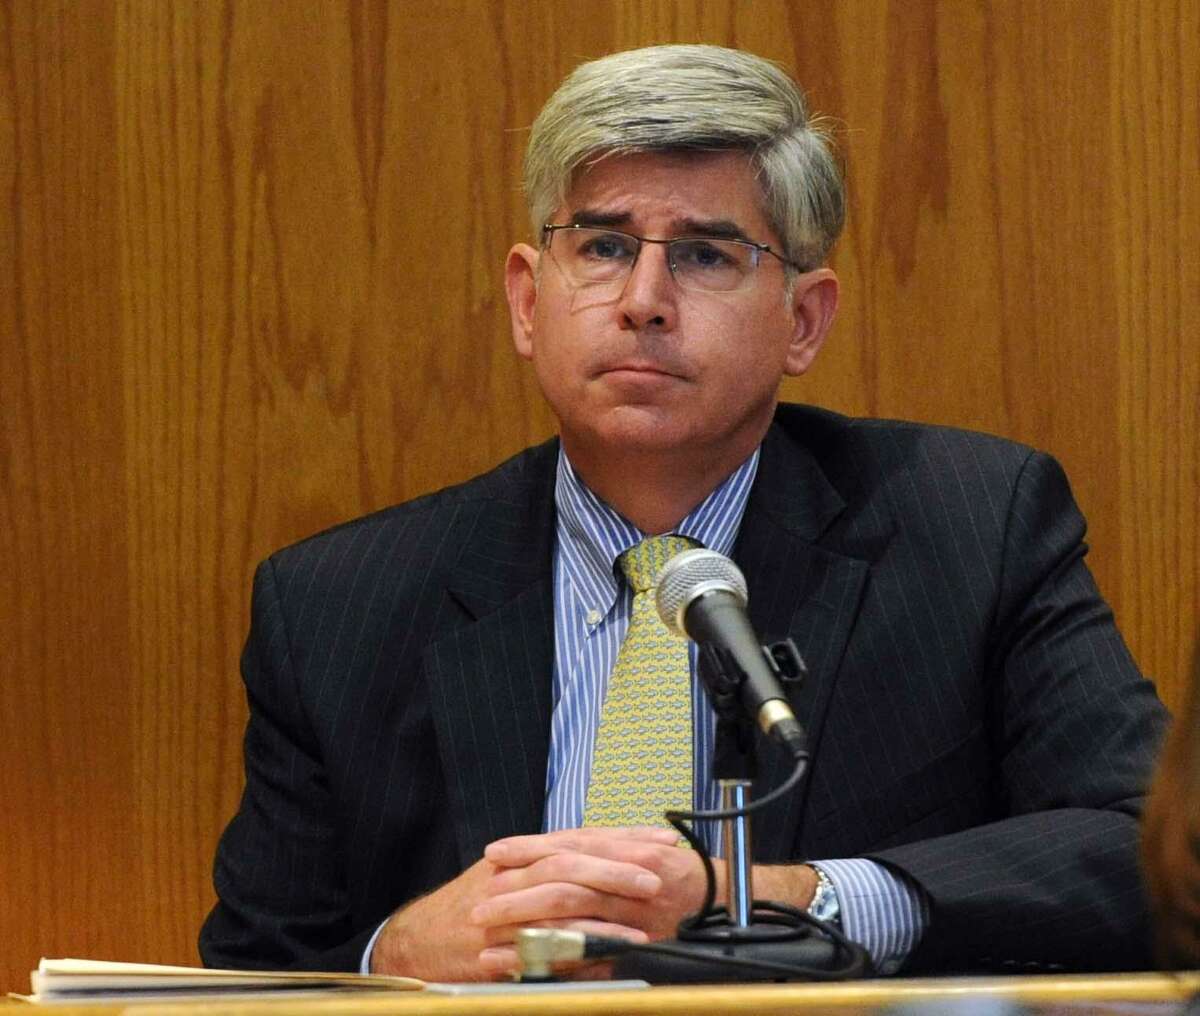 Chief Medical Examiner James Gill in Superior Court in Bridgeport, Conn. in 2014. The Office of the Chief Medical Examiner in Connecticut has been granted provisional accreditation by the National Association of Medical Examiners. However, if the state medical examiner’s office doesn’t address its staffing shortage within the next 12 months, its accreditation will be yanked.